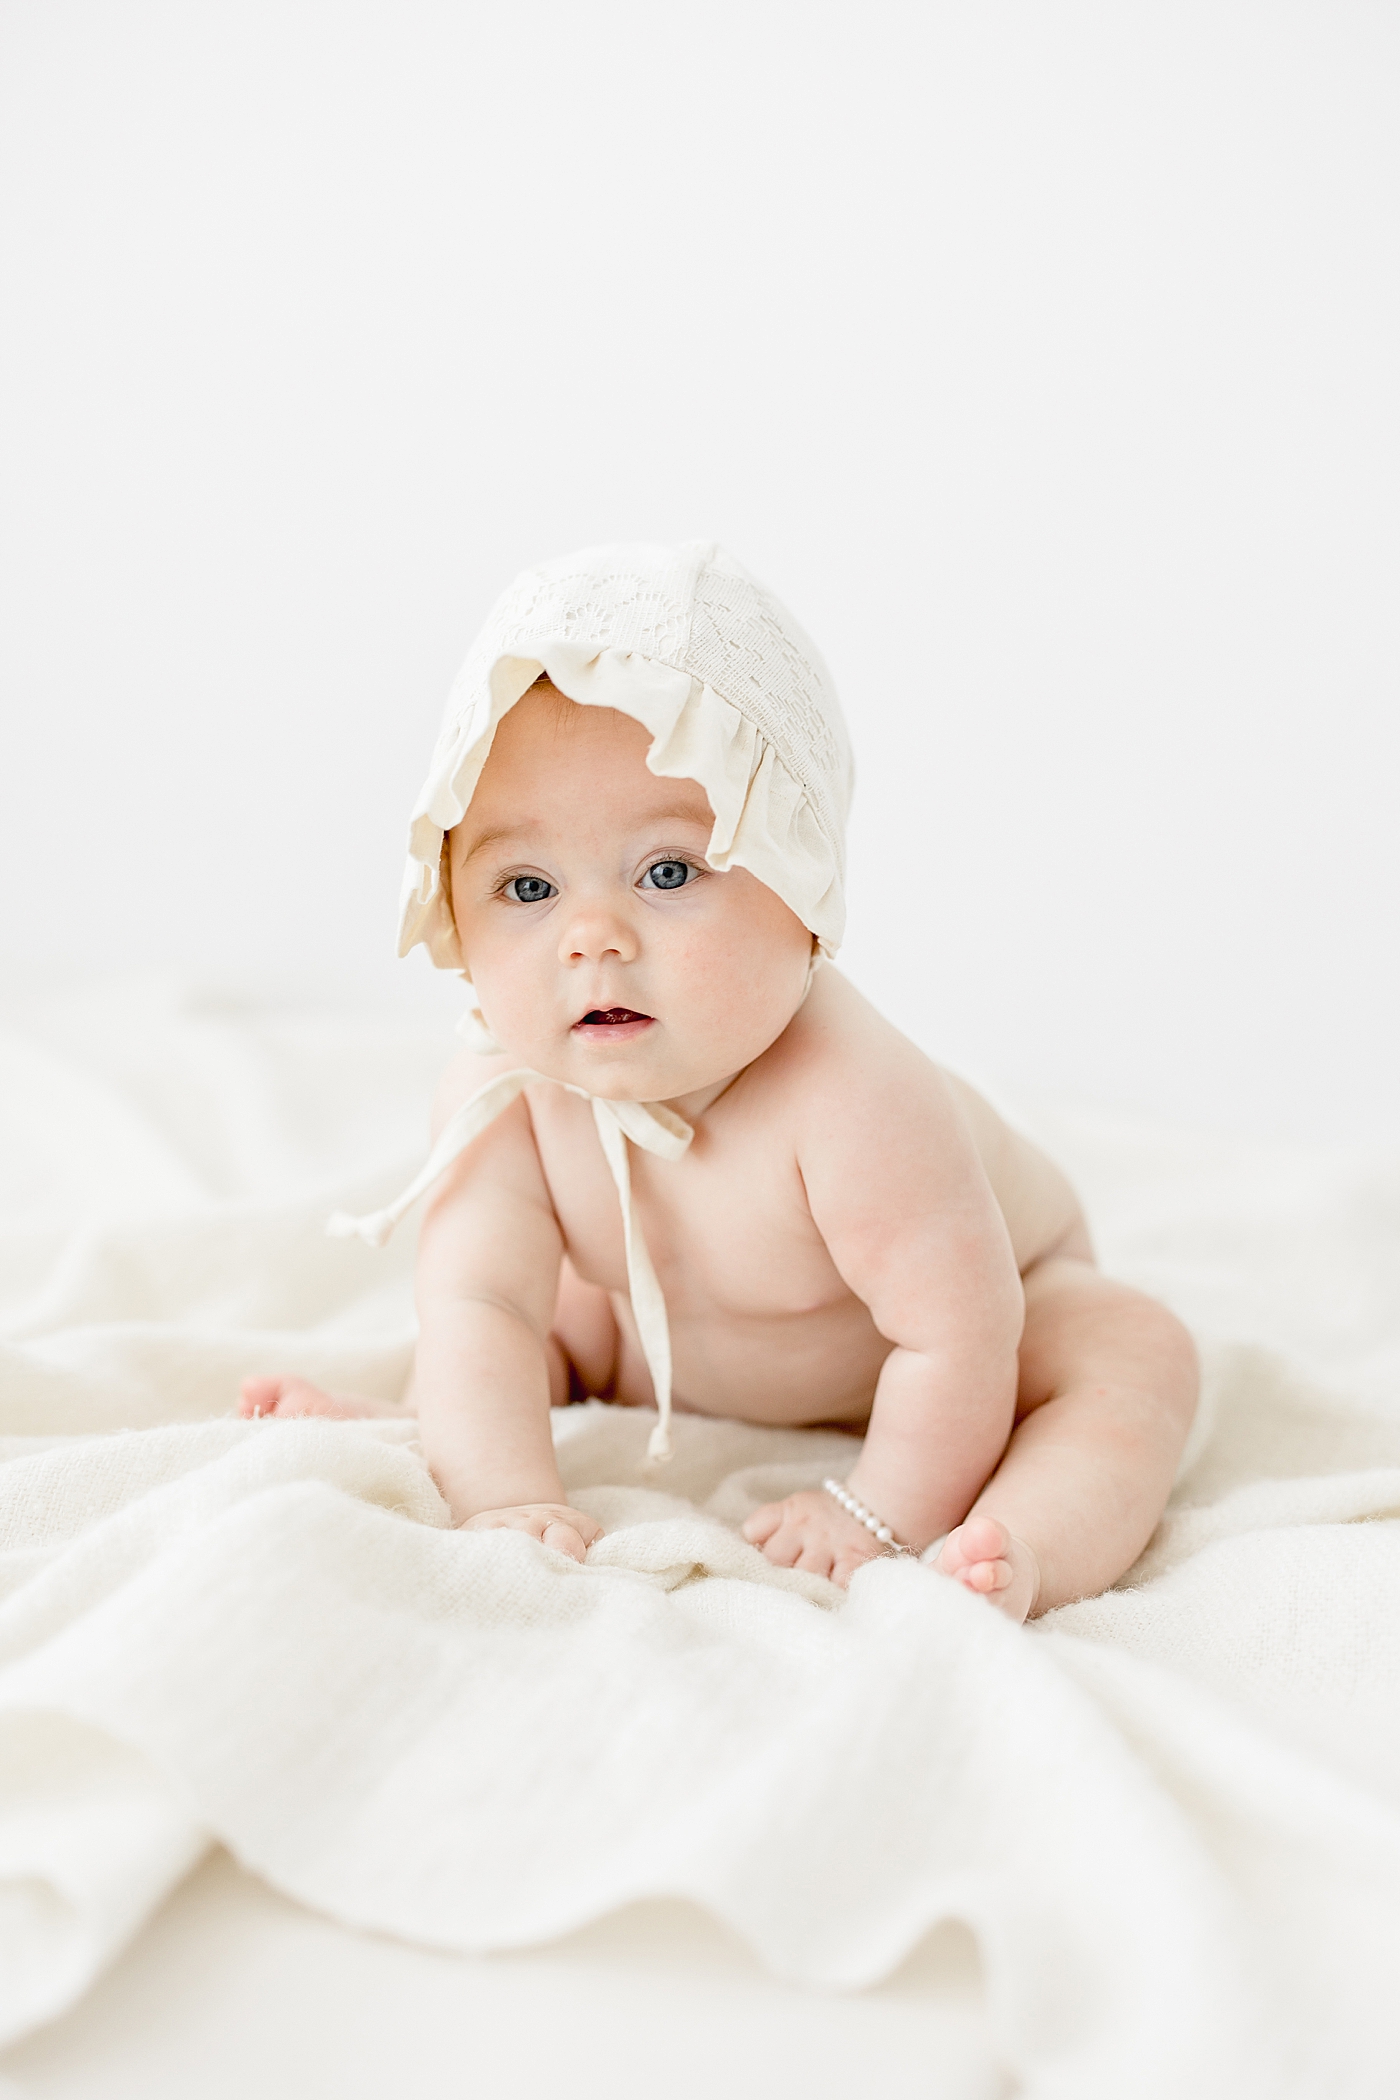 Six month old baby girl sitting up for milestone photos. Photo by Brittany Elise Photography.